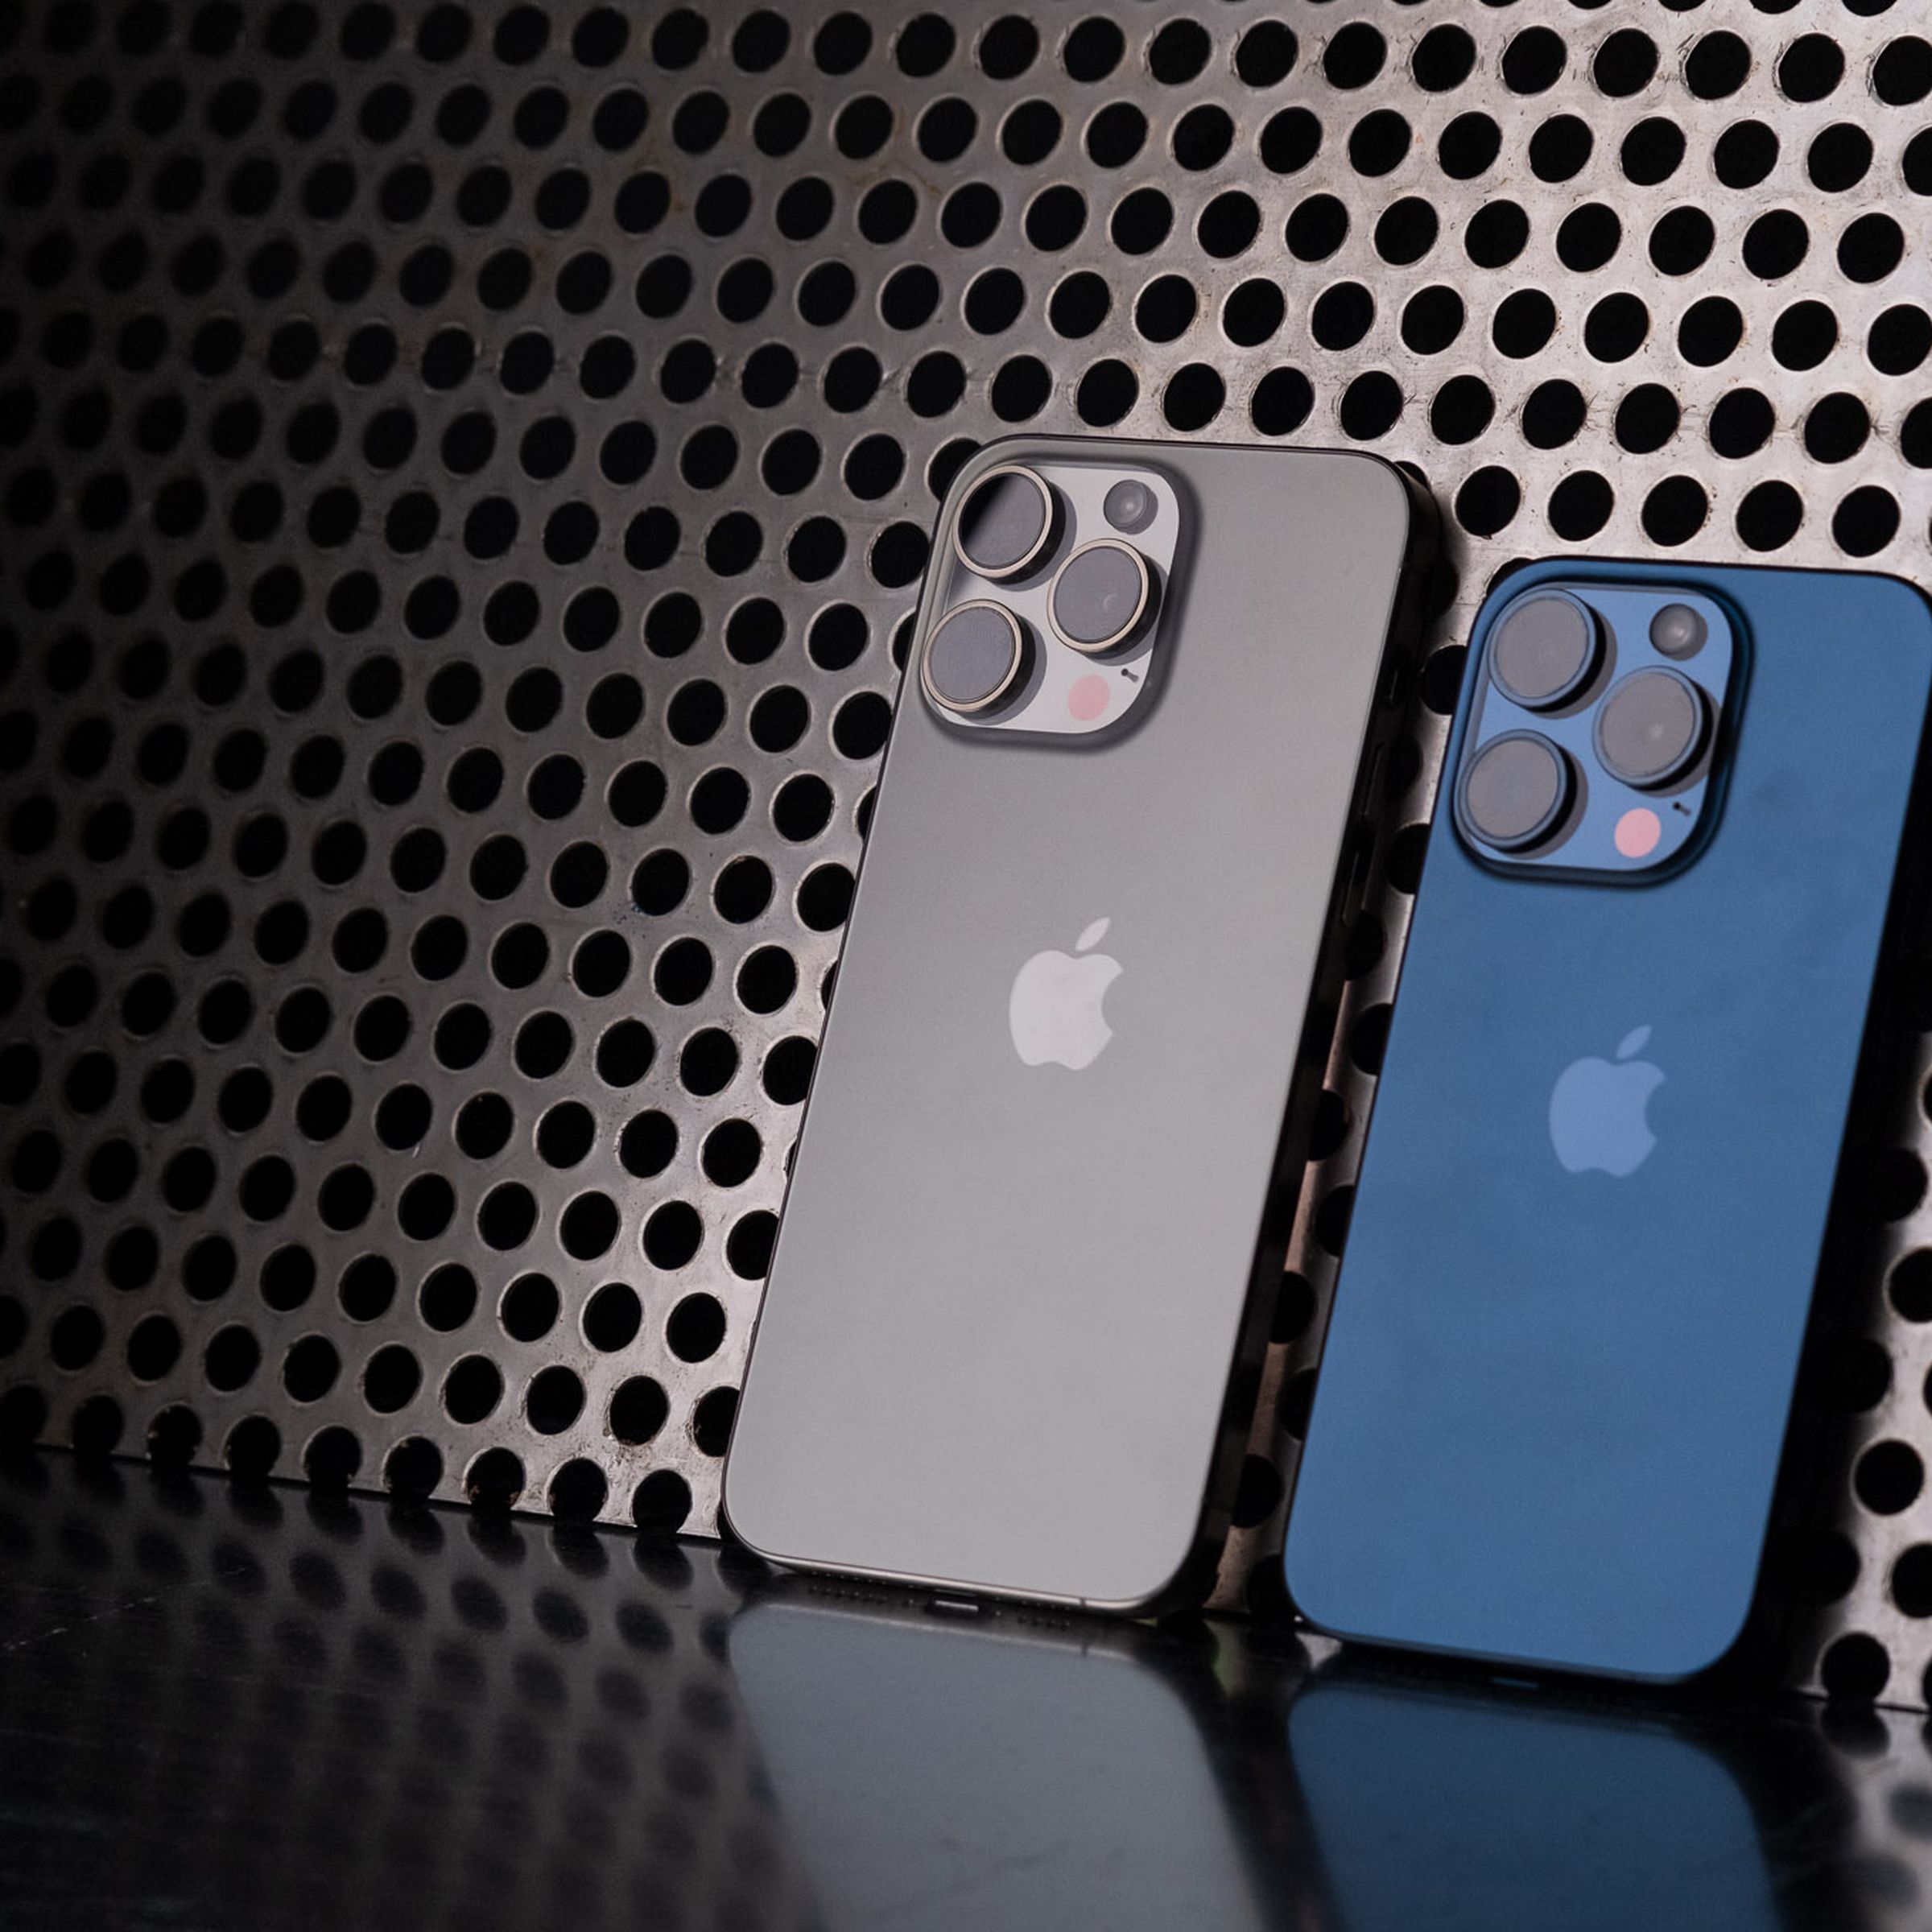 Blue iPhone 15 Pro and natural titanium iPhone 15 Pro Max leaning against a perforated metal background.